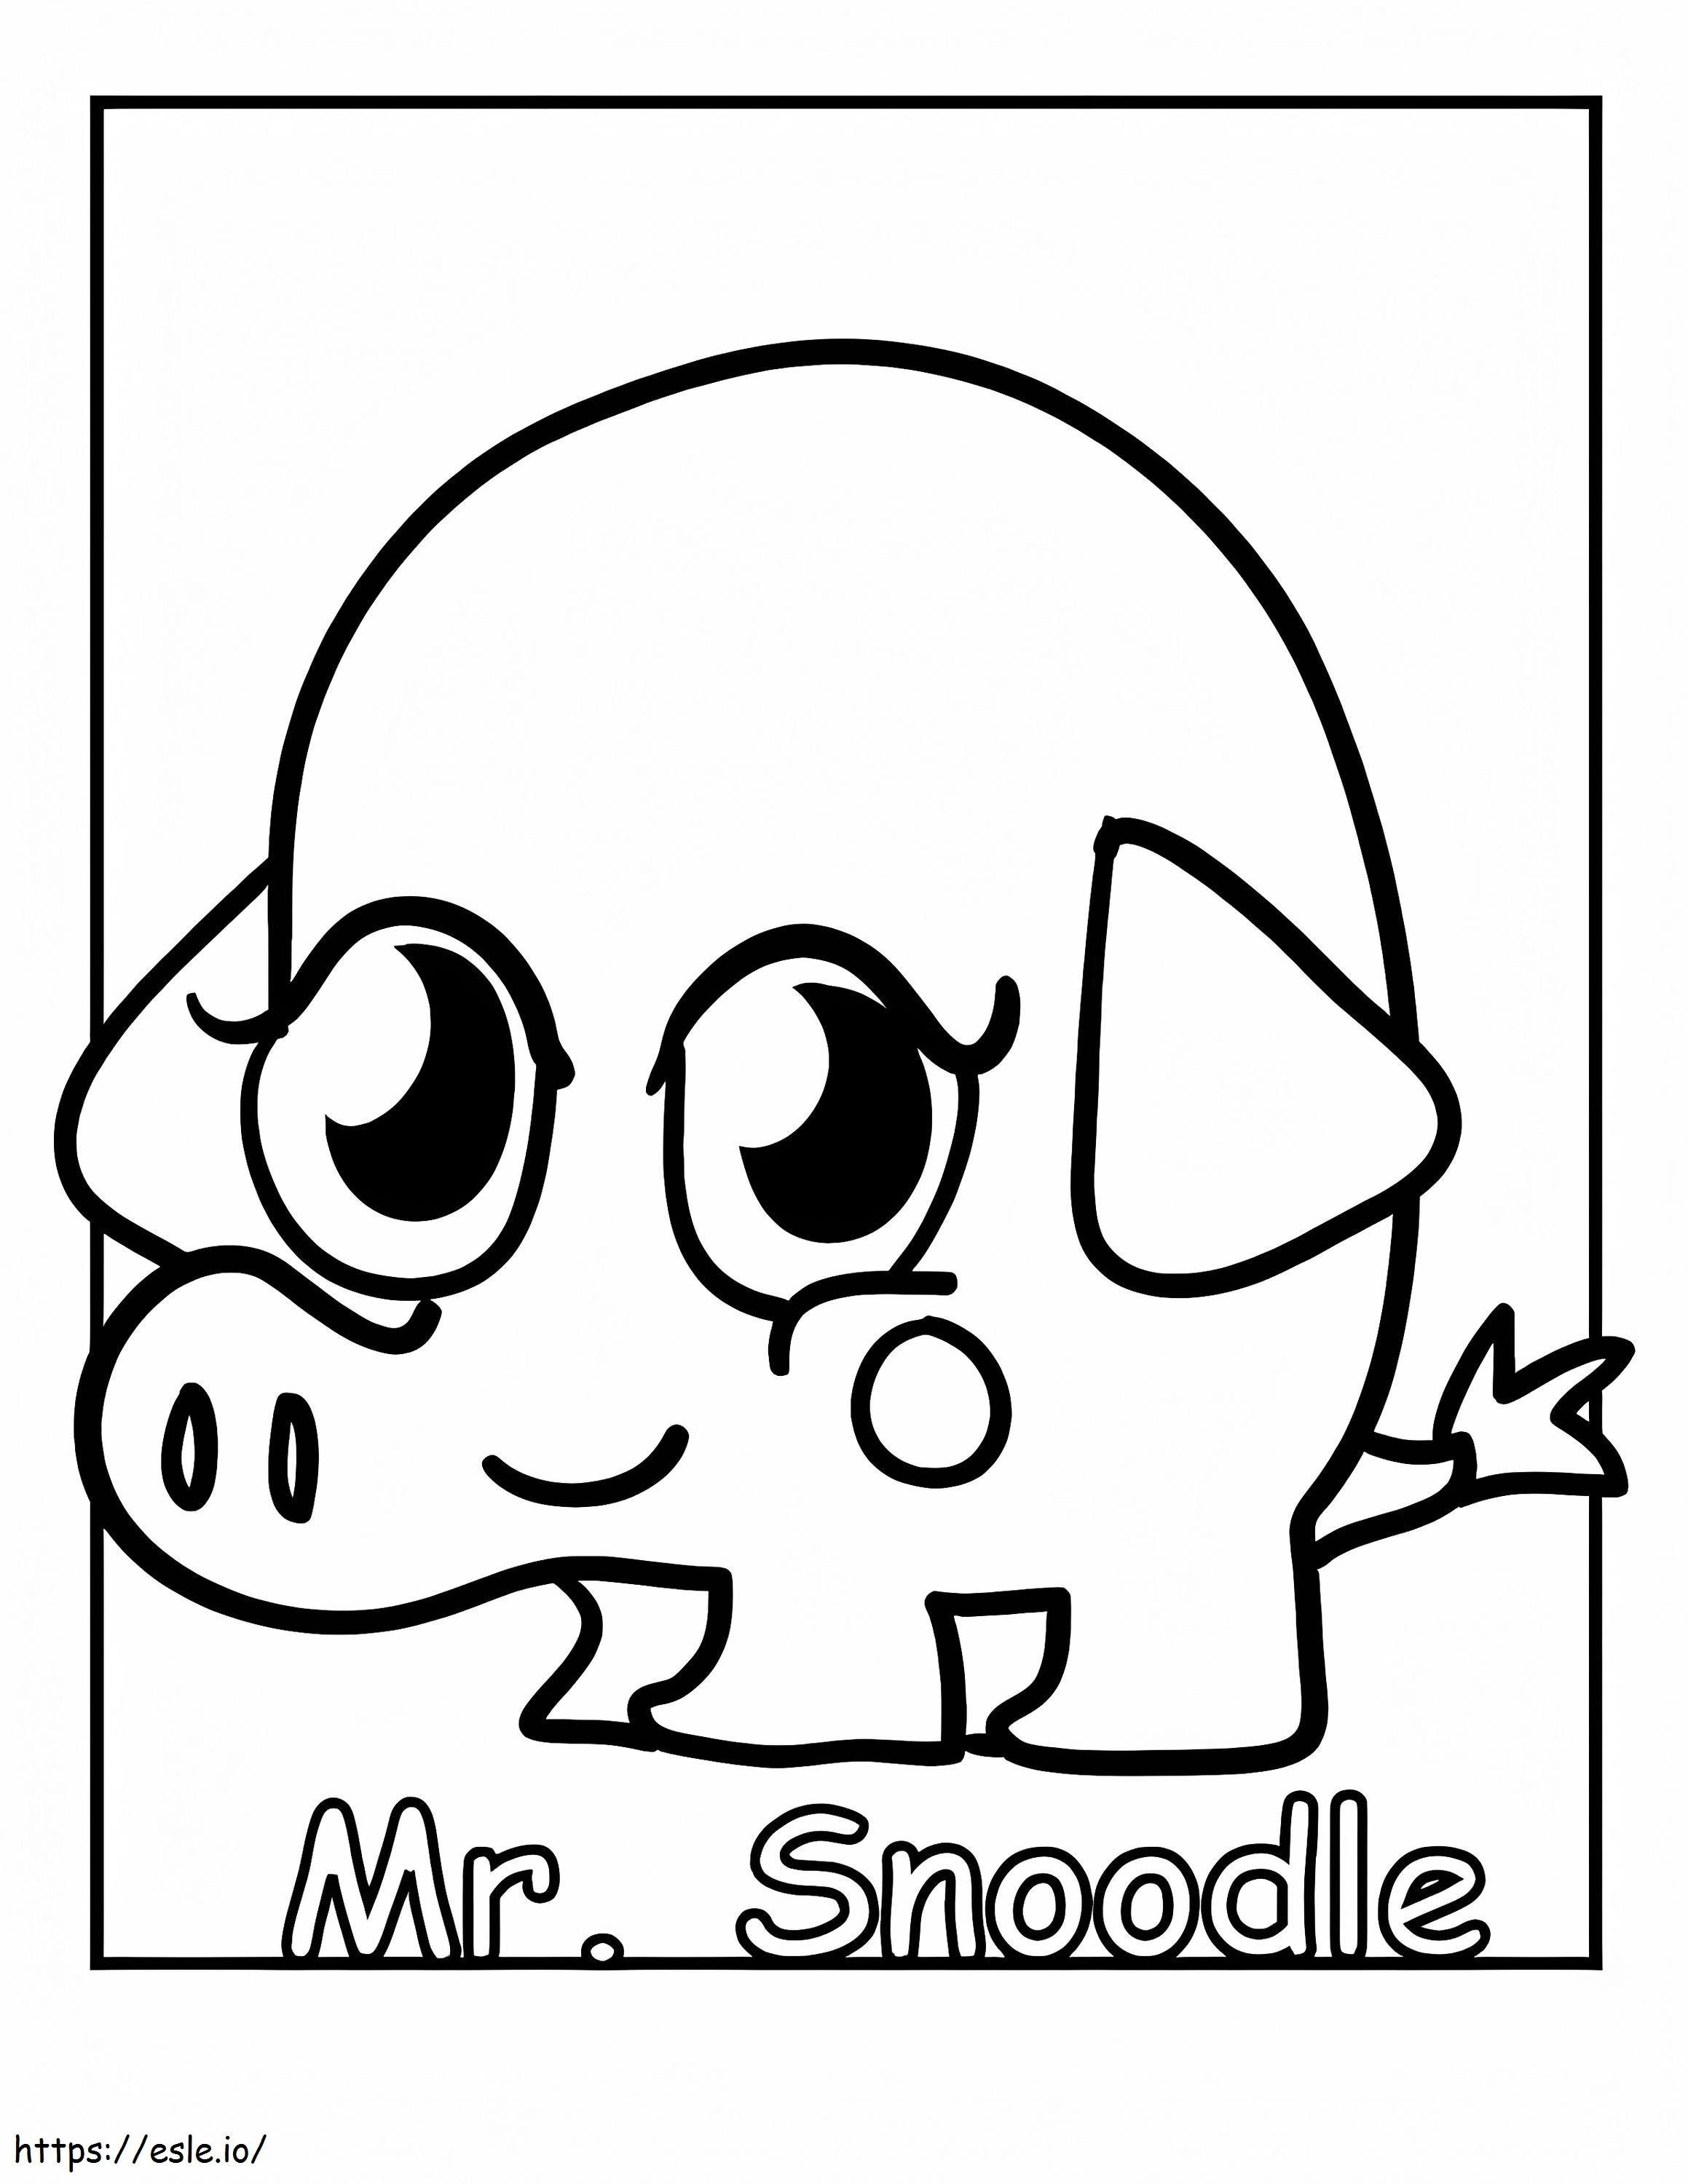 Mr. Snoodle Moshi Monsters coloring page